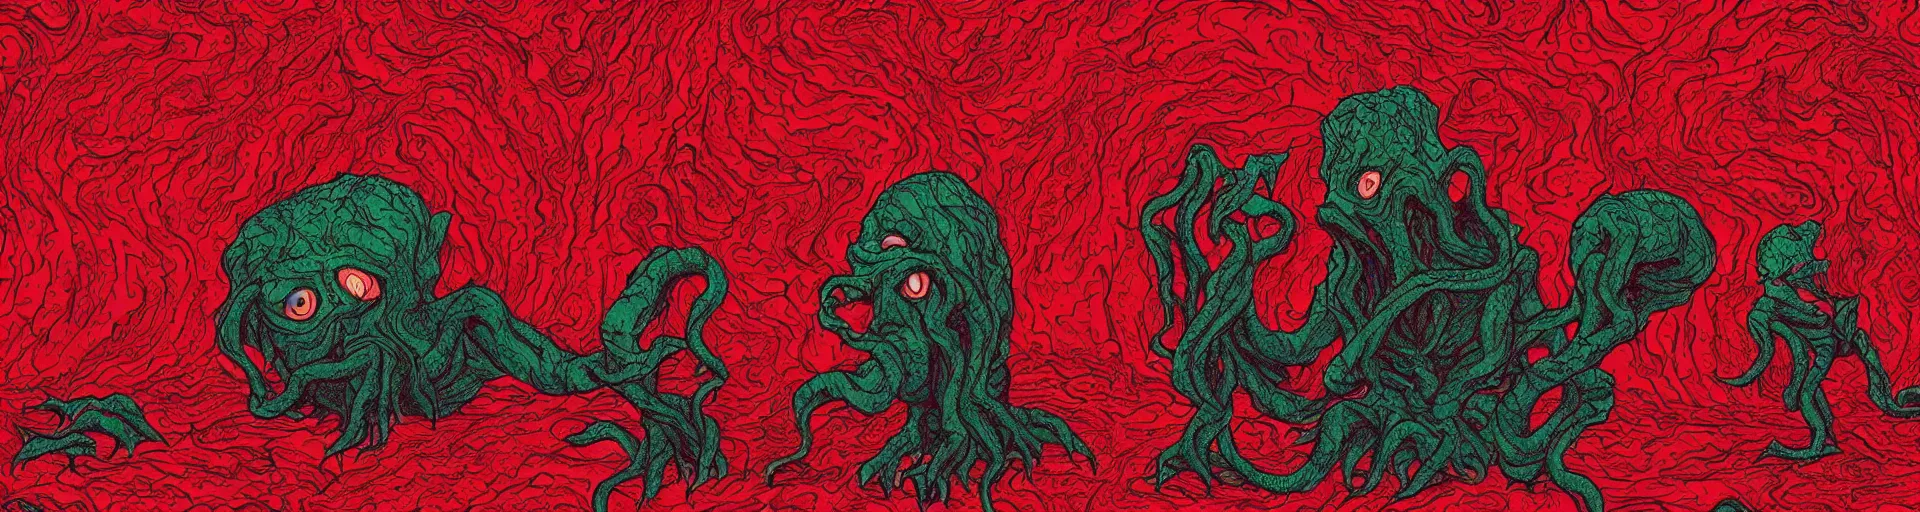 Prompt: shape-shifting Cthulhu lost inside the red room from Twin Peaks while David Lynch laughs in the background, fractal tile, Bob, mike judge art style, 90s mtv illustration